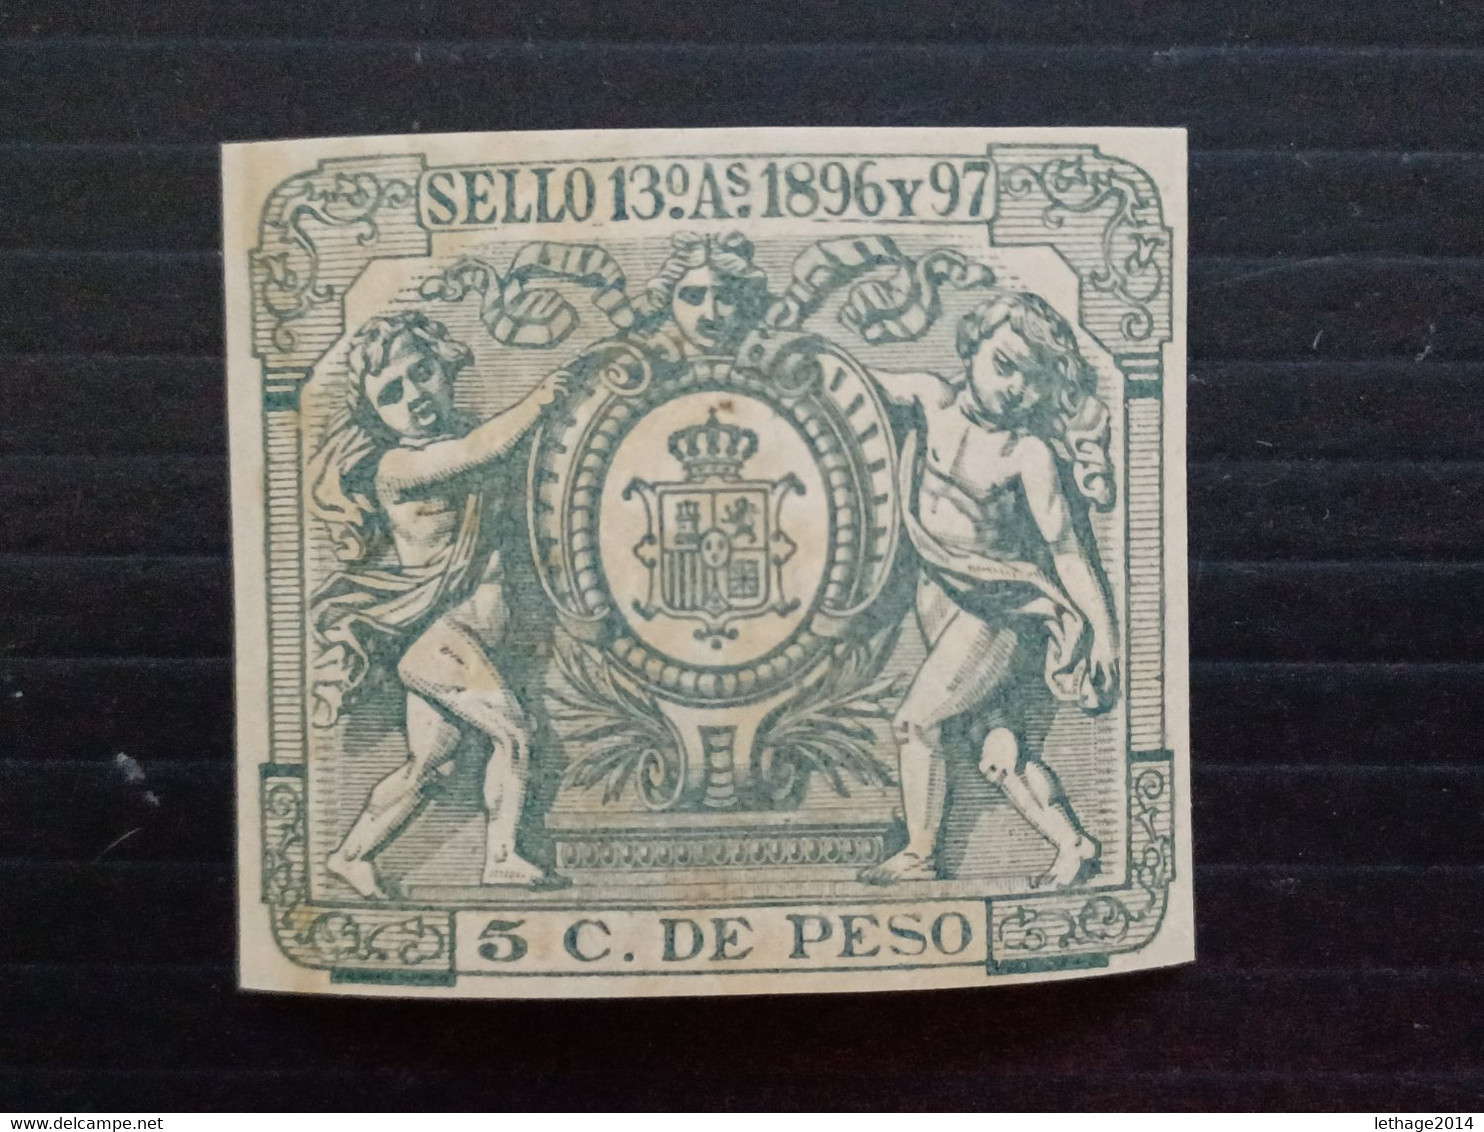 STAMPS CUBA 1896 FISCAL MARITIME NAVAL COMMERCIAL EXCHANGE TAXES VERY RARE MNH ORIGINAL - Segnatasse